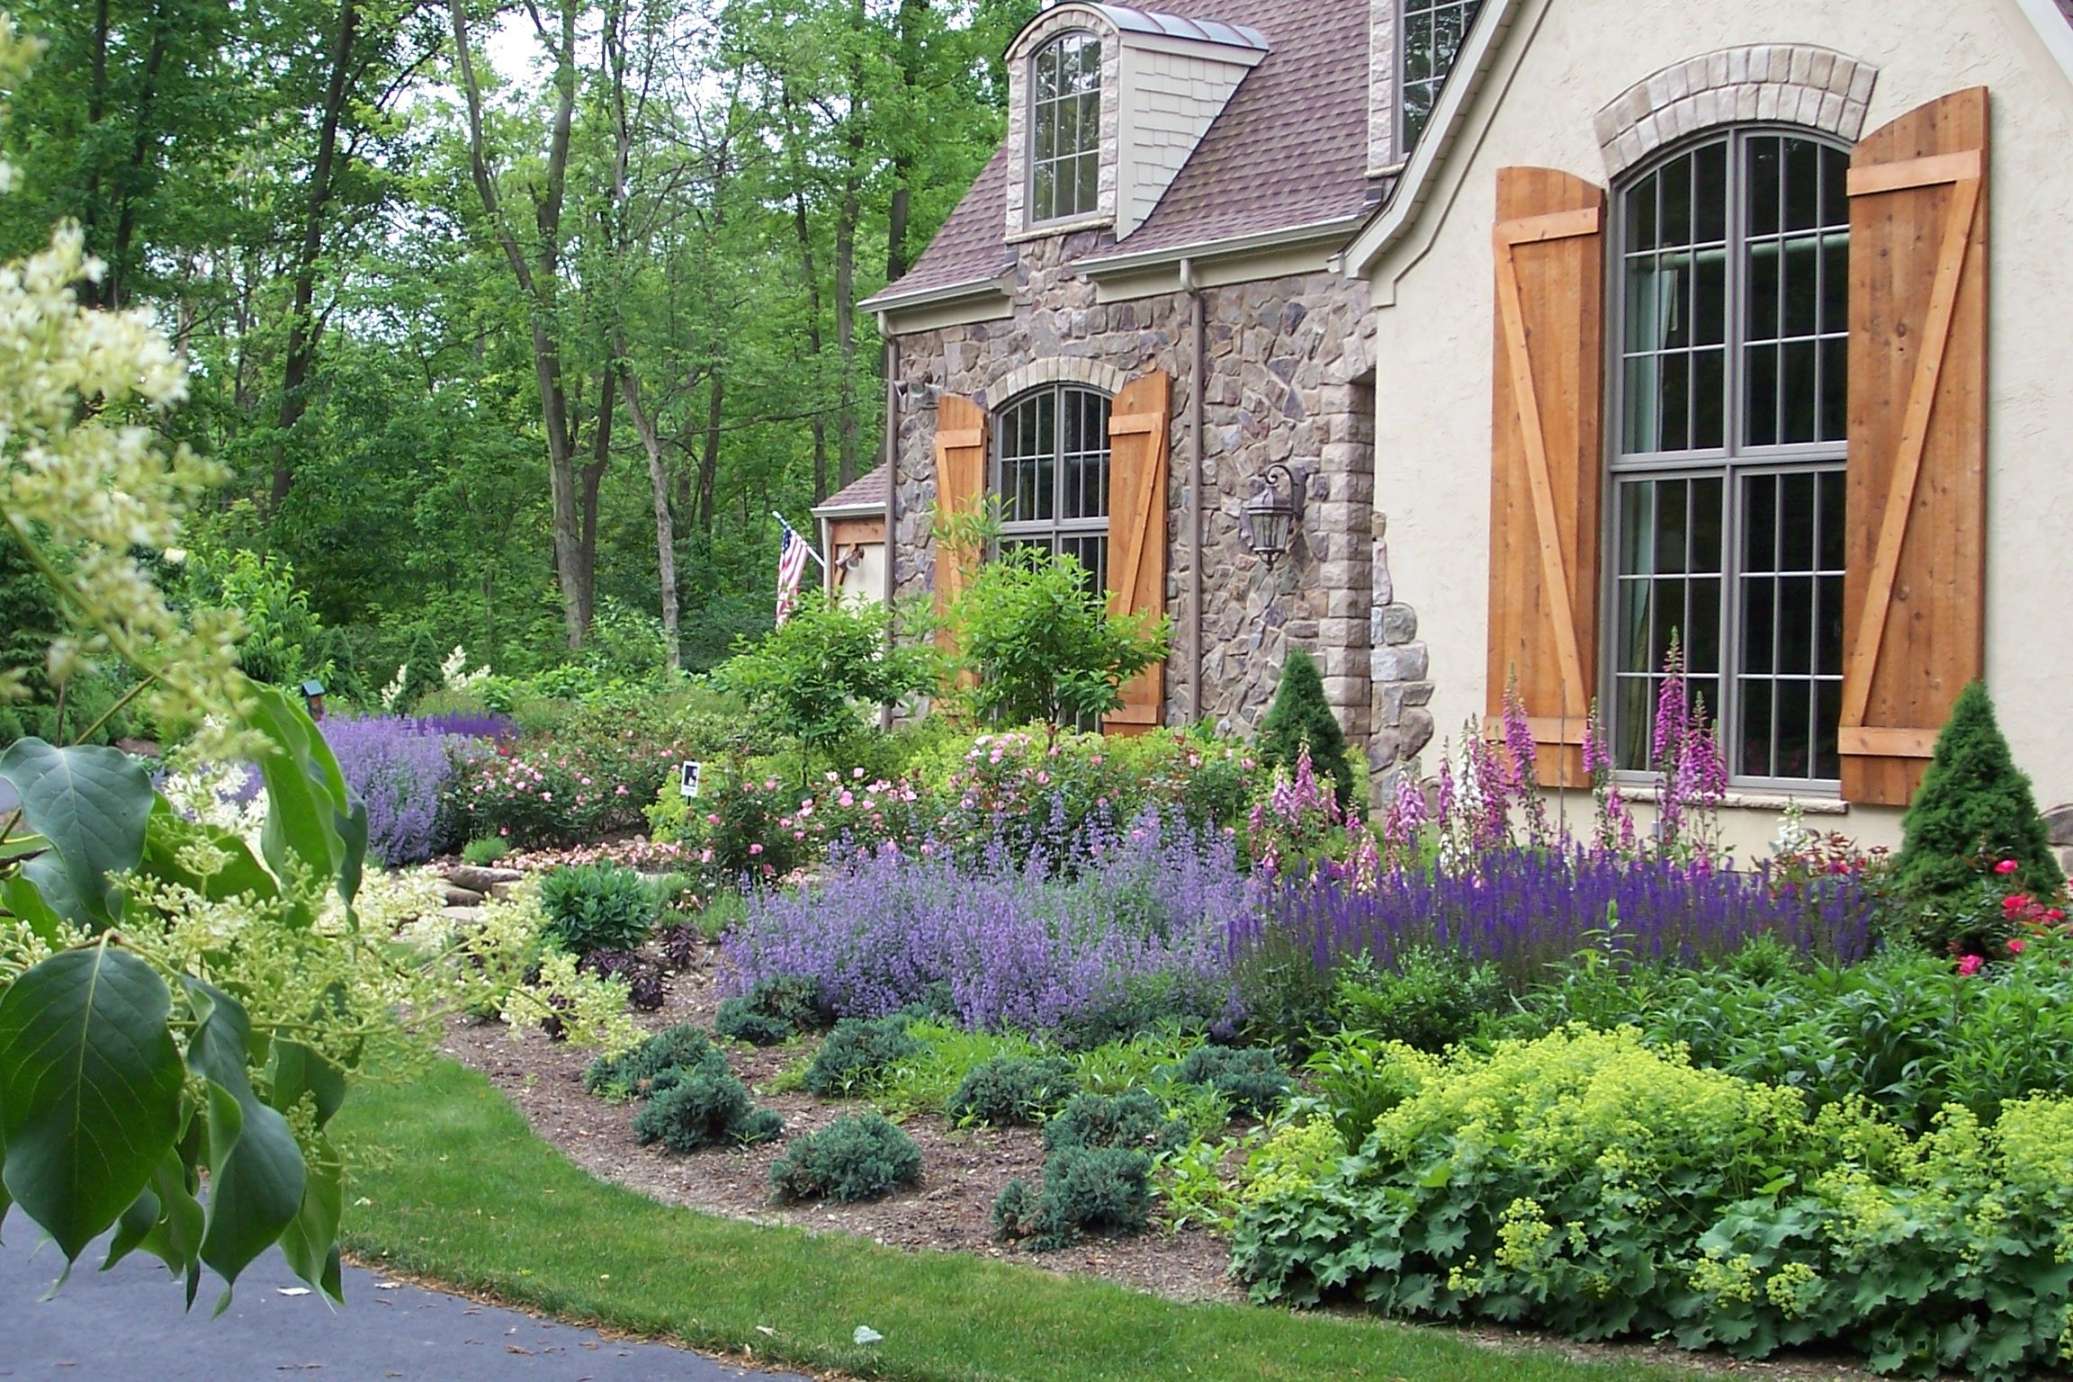 Woodland Country French - Bath, Ohio  French country landscaping